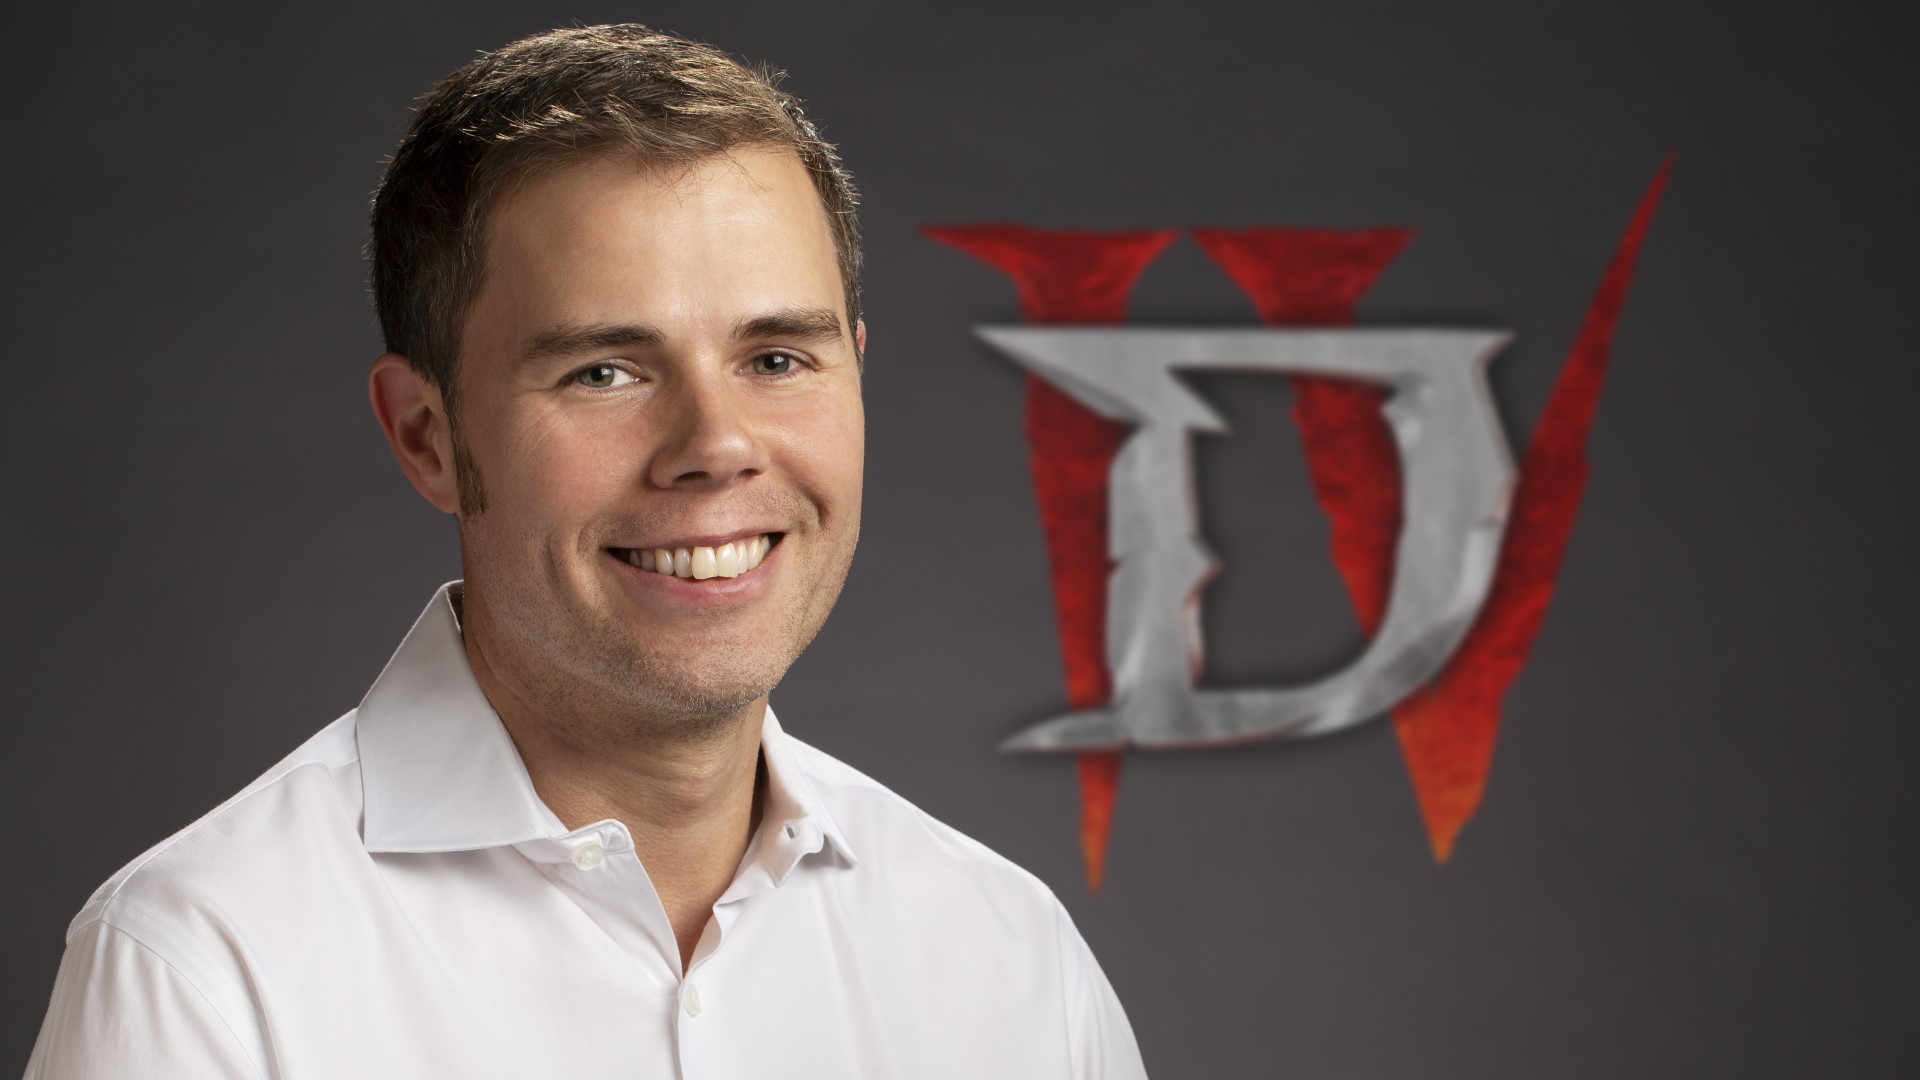  Diablo 4 gets a new game director 